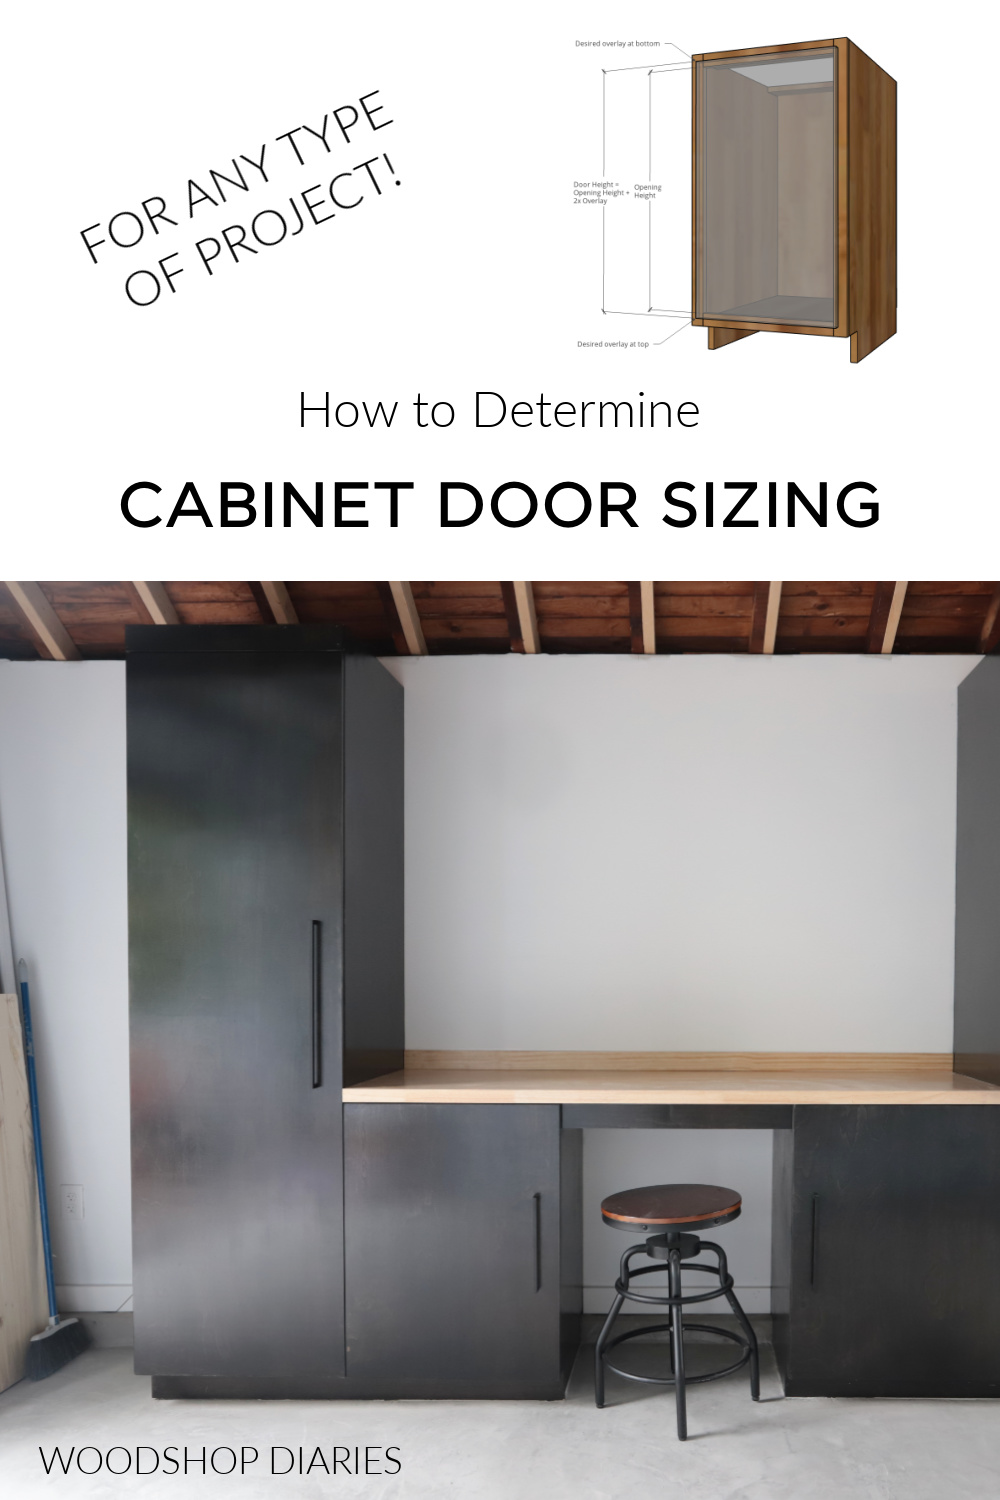 Pinterest collage image showing dimensional diagram at top and full overlay garage cabinets at bottom with text "how to determine cabinet door sizing for any type of project"